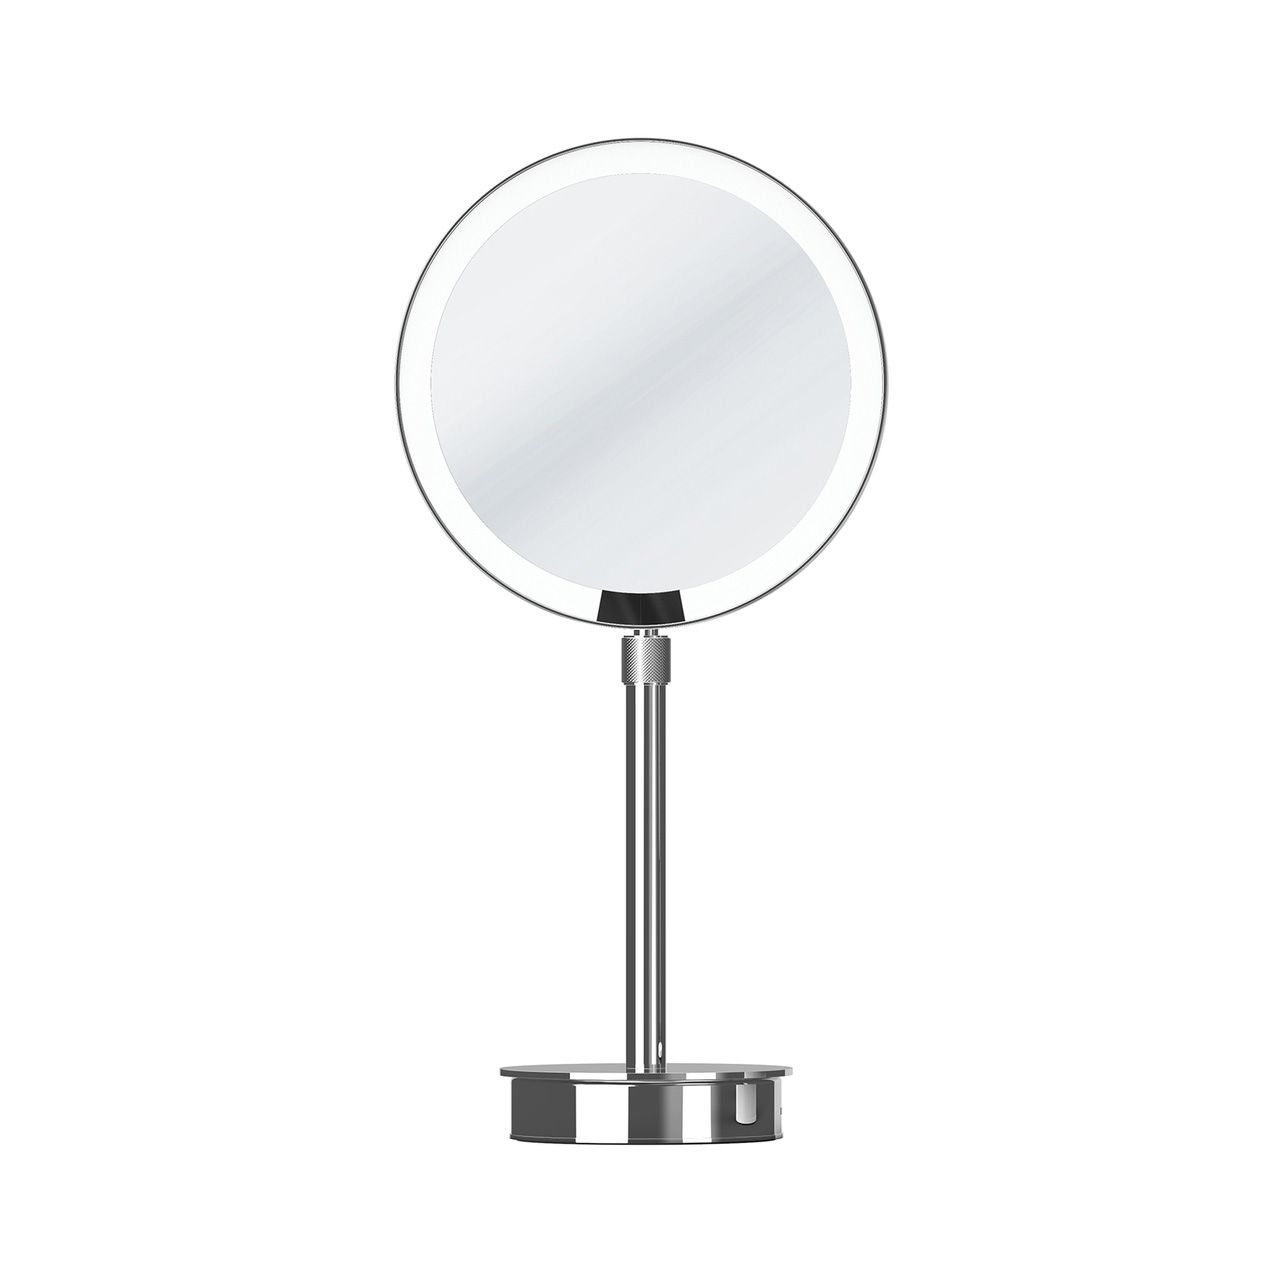 How Are Rechargeable Magnifying Mirrors Charged?